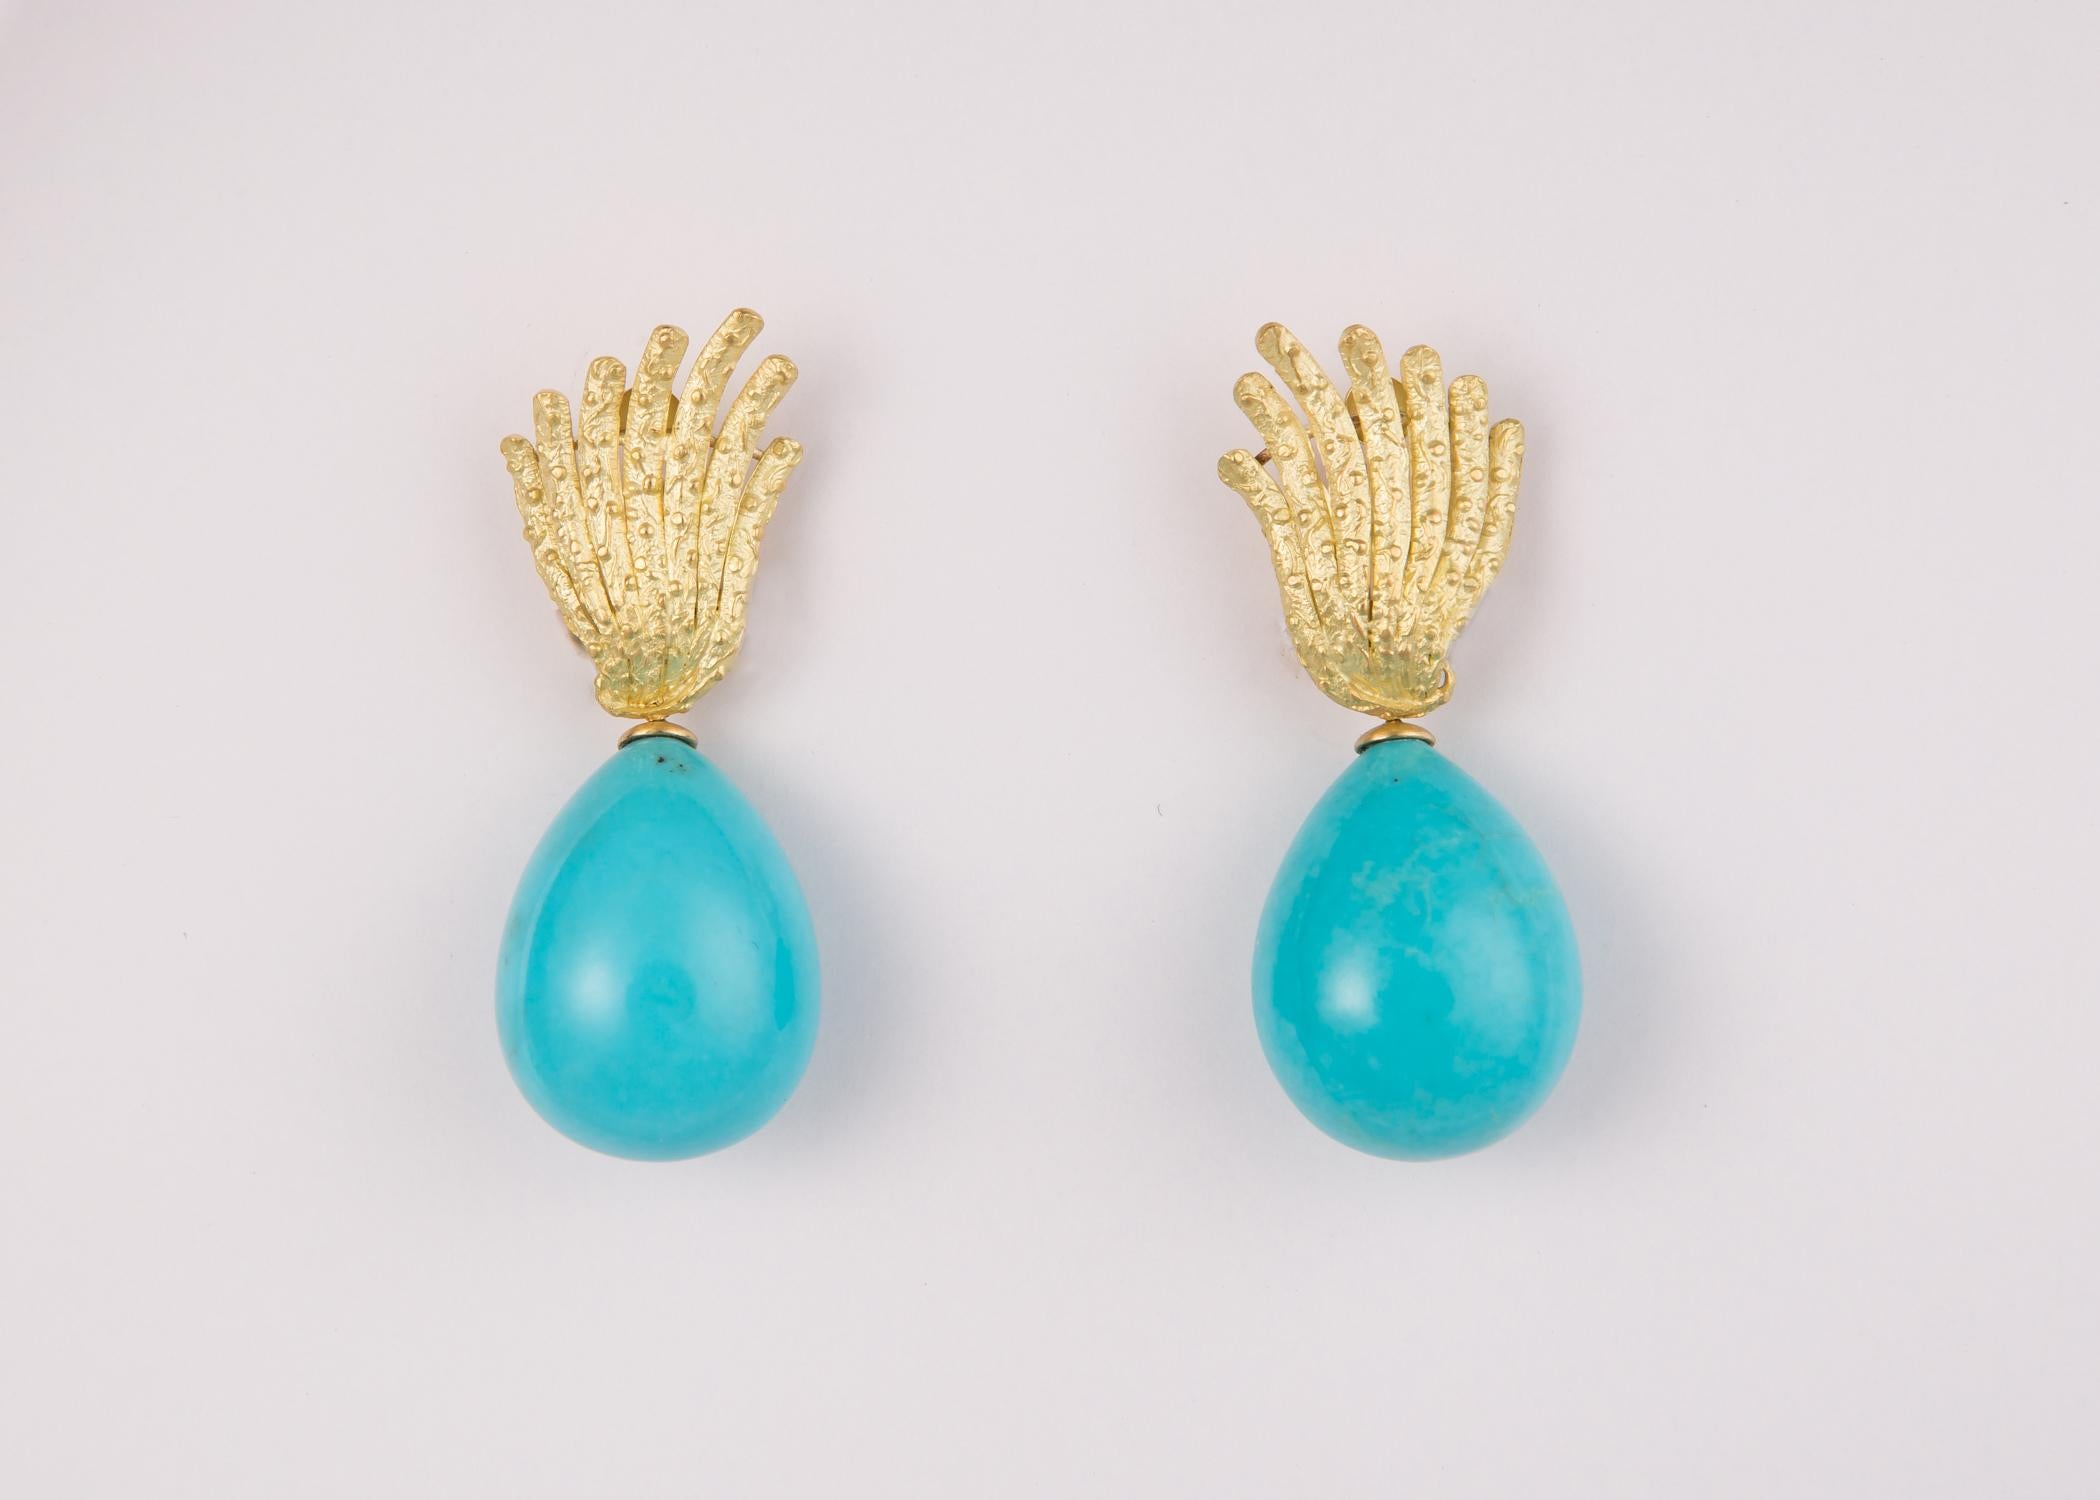 Contemporary Tiffany & Co. Gold and Turquoise Drop Earrings